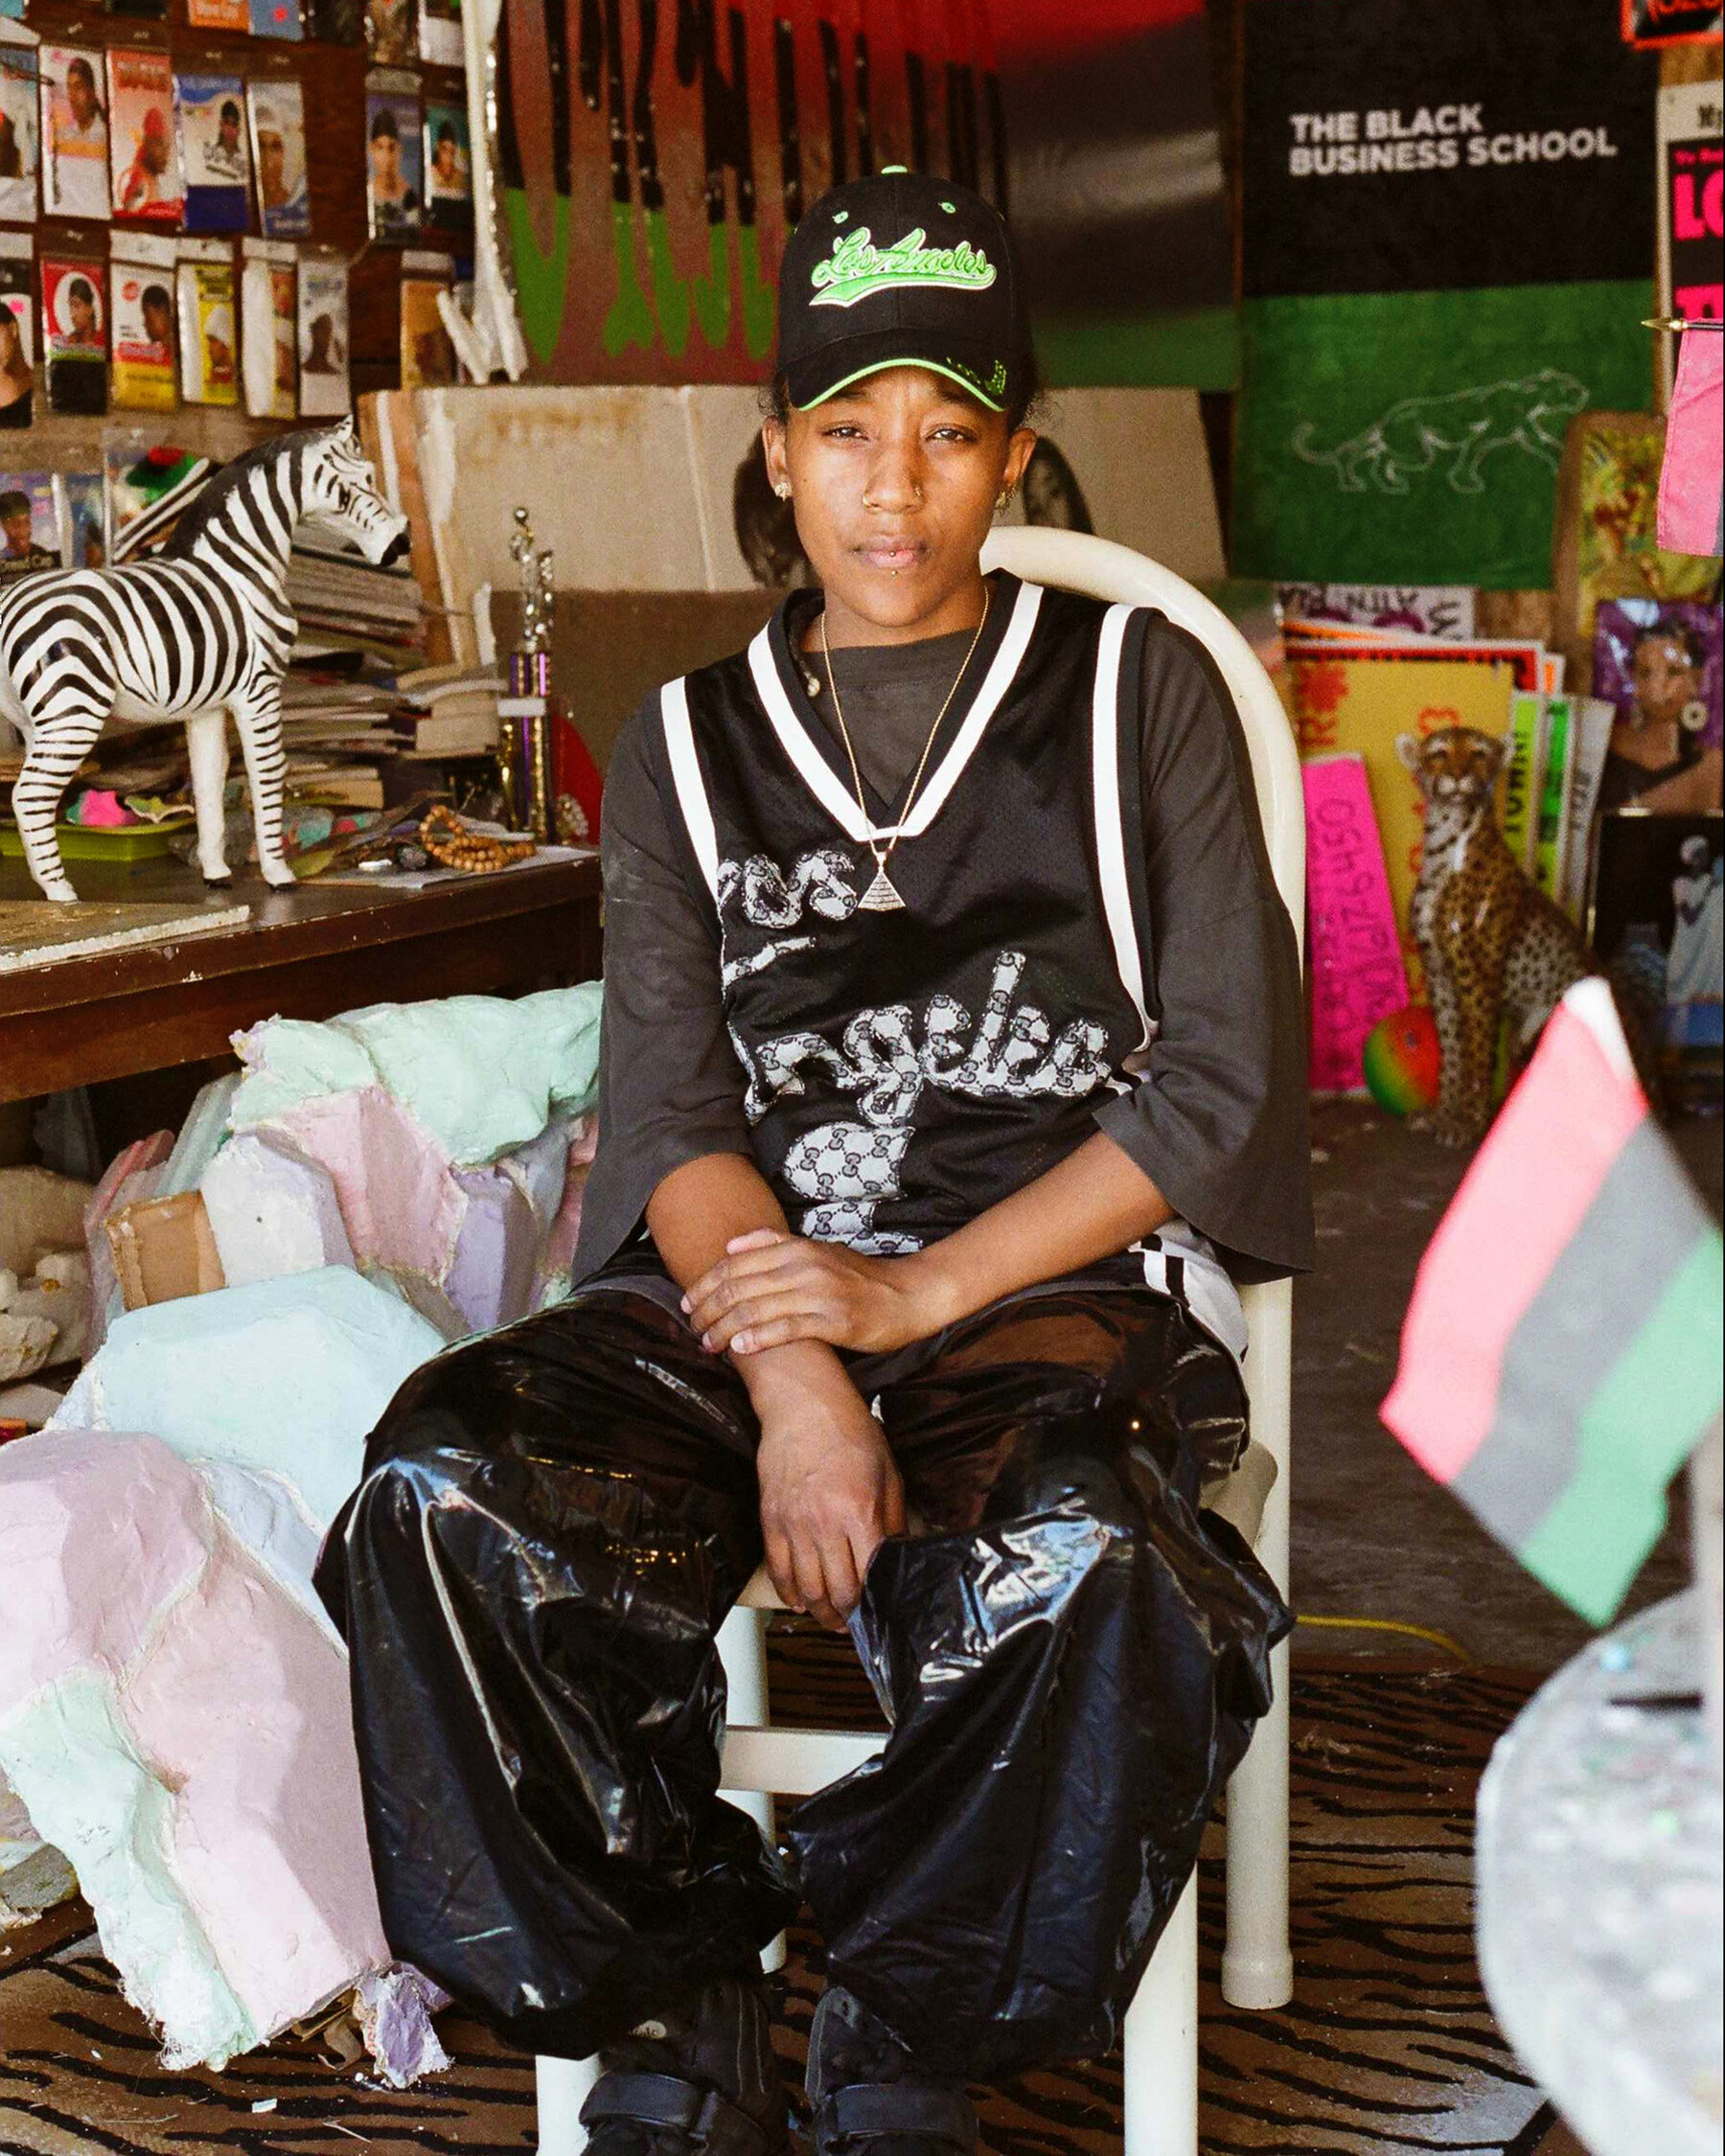 A dark-skinned woman sits in a white chair in what looks to be a busy artist's studio space. It is filled with posters, canvases, materials, a zebra figurine on a desk, and a cheetah sculpture on the floor in the far back. The woman wears a baseball hat, sports jersey over a grey shirt and shiny, baggy, black pants.